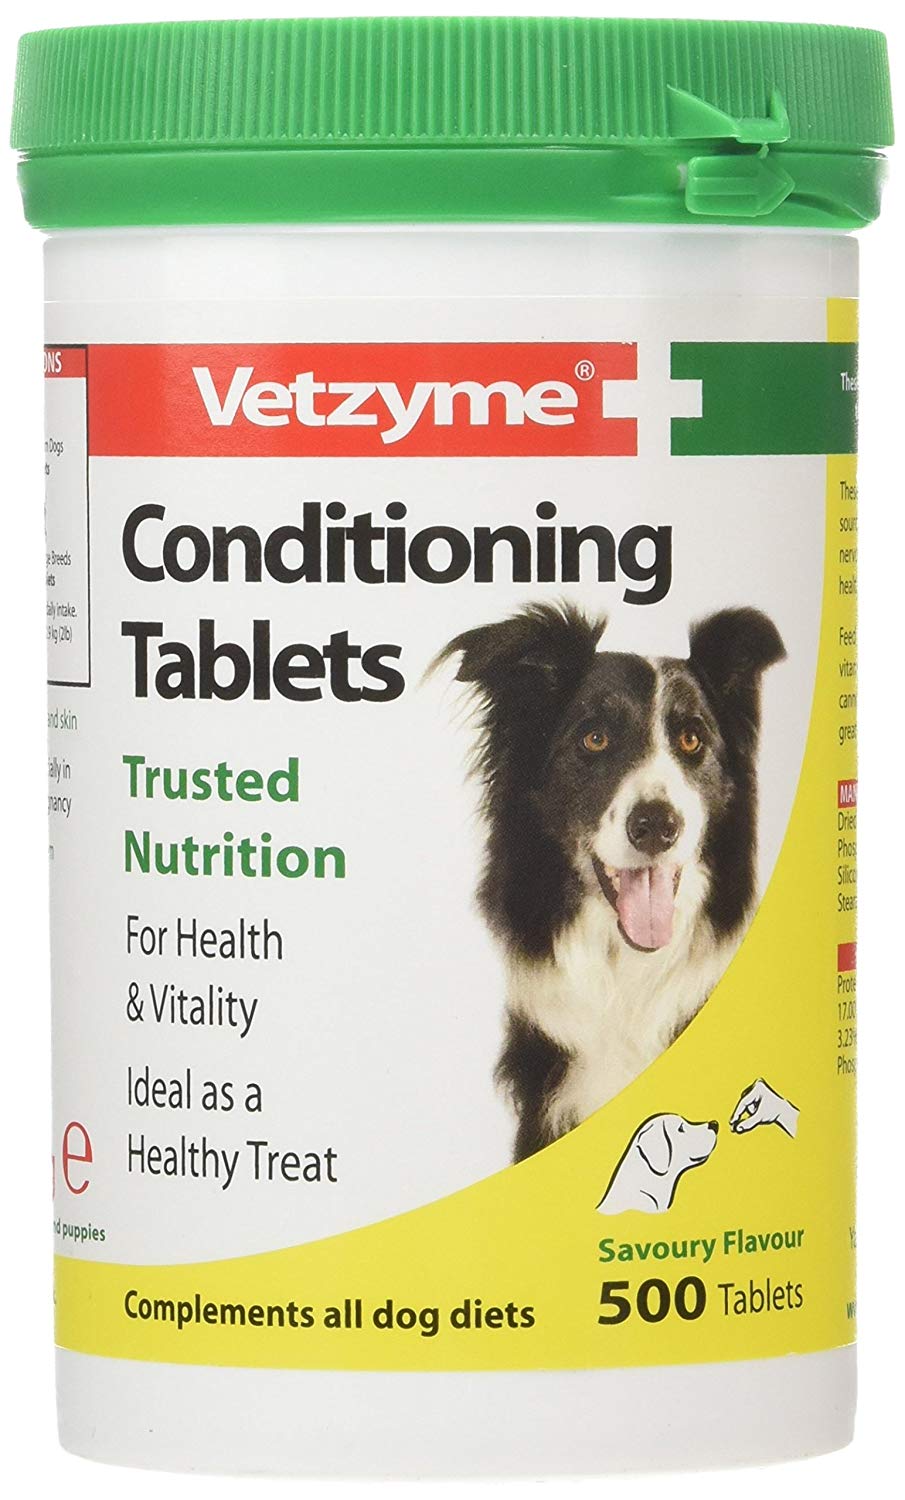 Vetzyme Conditioning Tablets For Your Pets, 500 Tablets